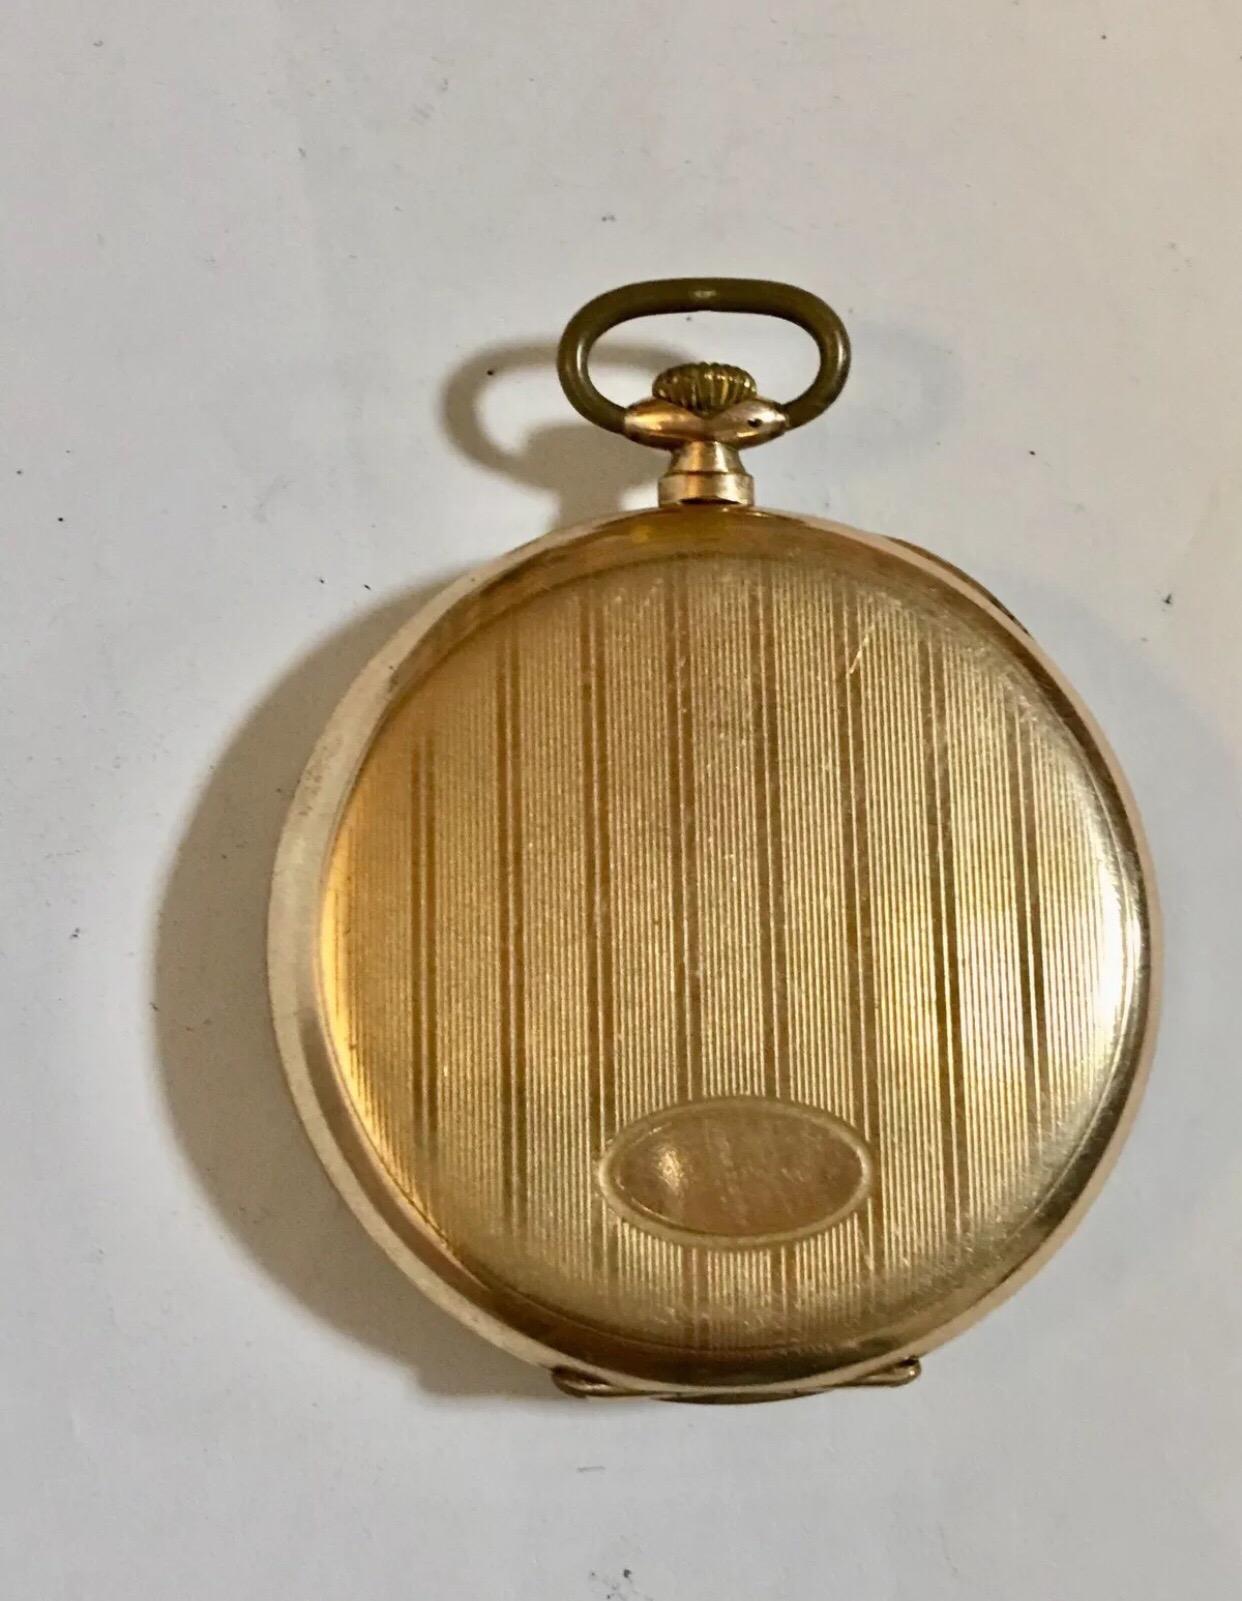 Stunning Gold-Plated Cyma Dress Pocket Watch For Sale 4